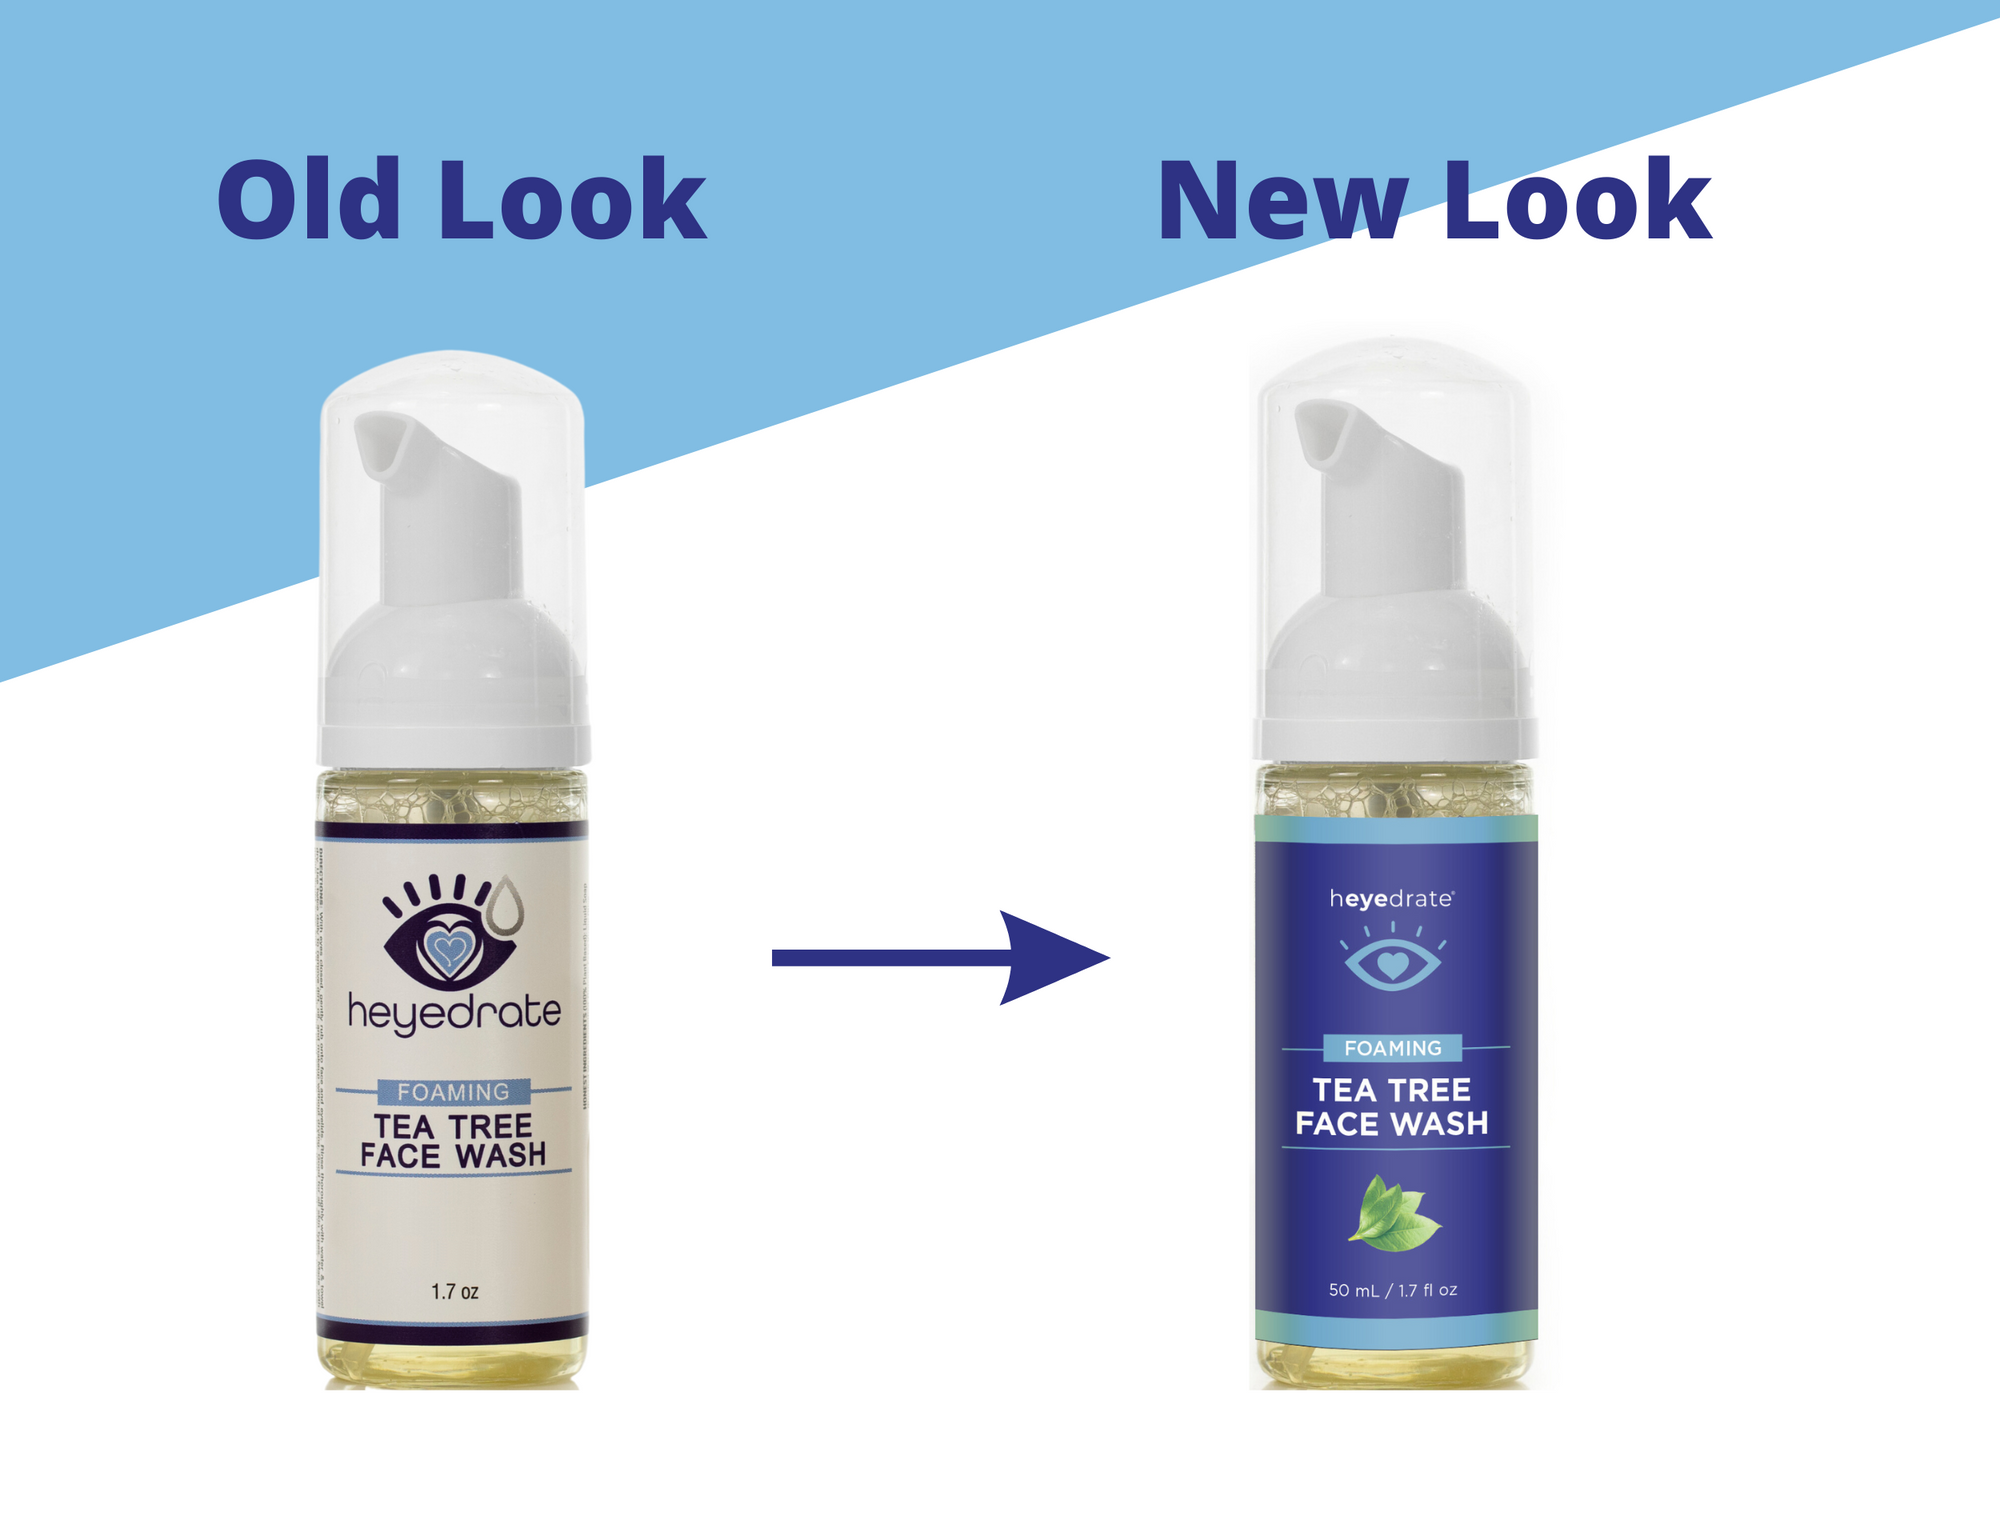 We Love Eyes® Natural Eye Lid Cleaner Products - Royal Oak Optometry -  Optometrists in Victoria, BC, Canada